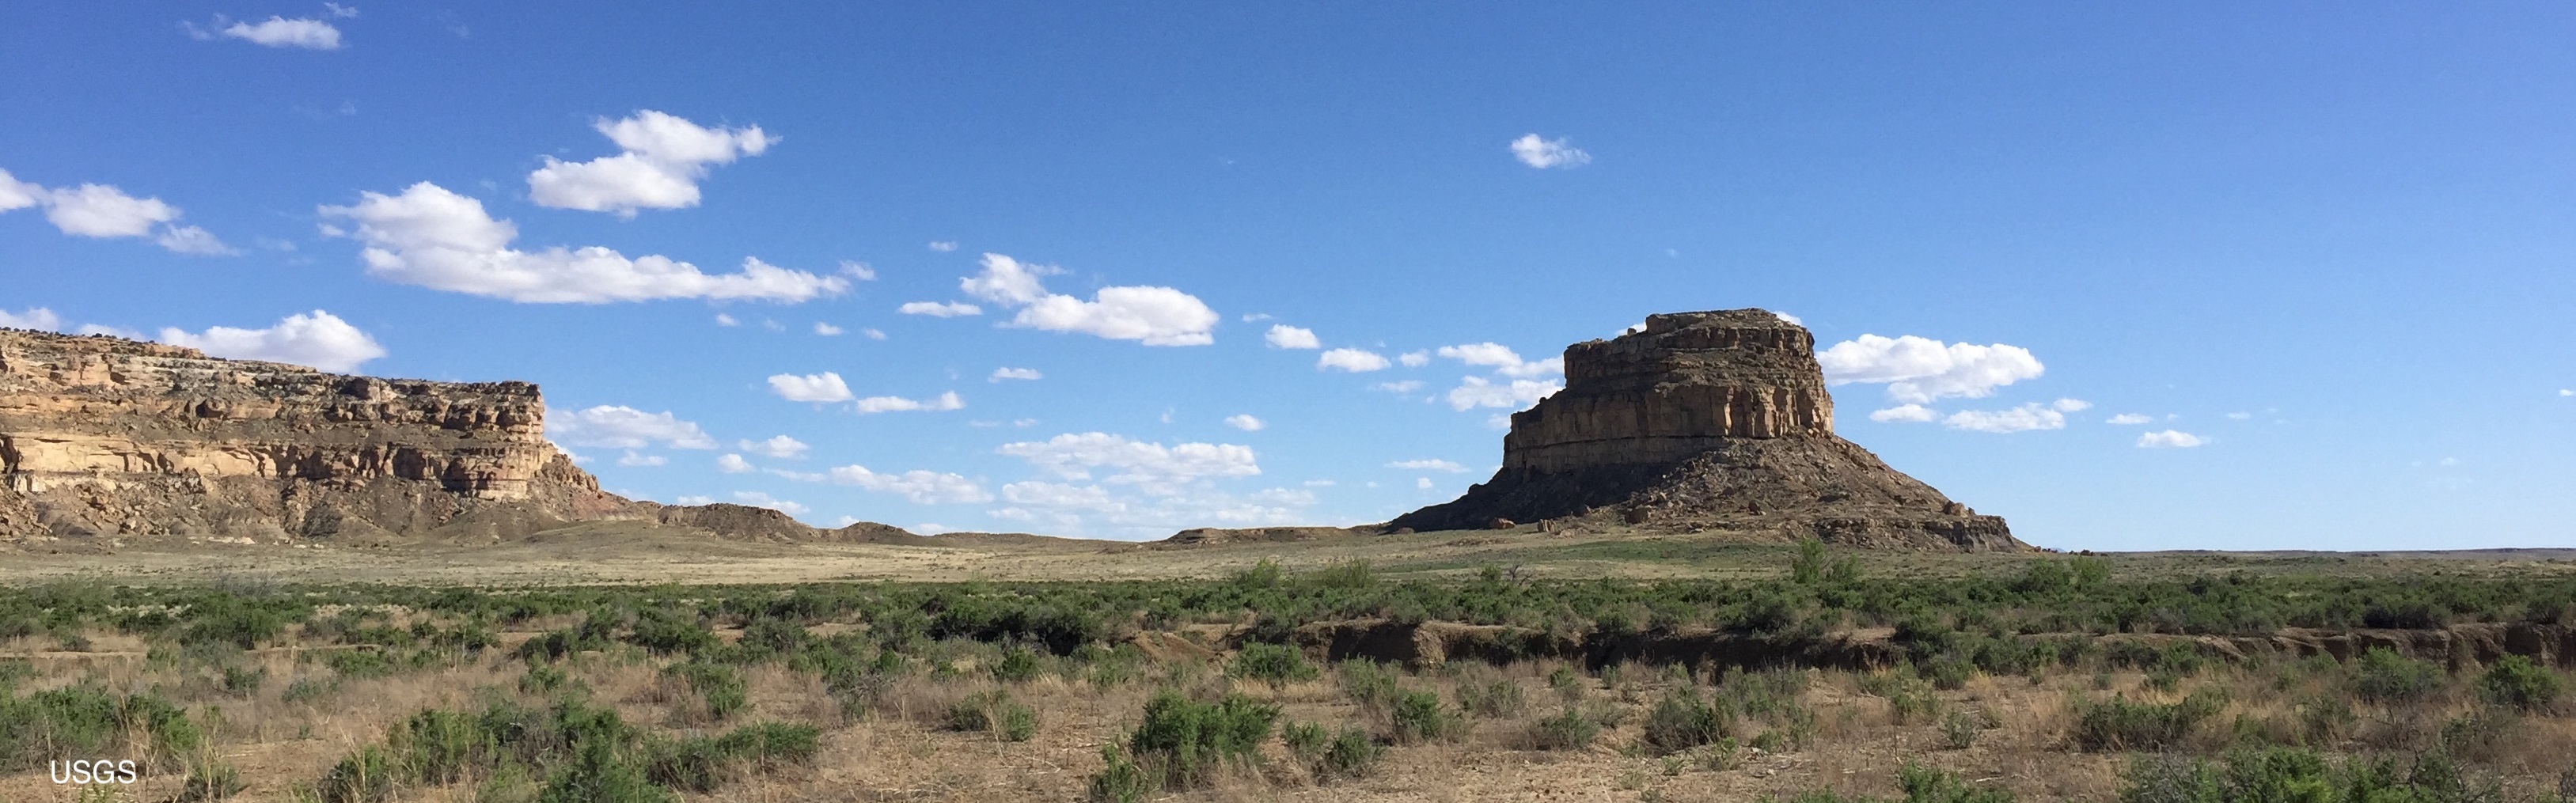 One platue and a butte landform across from one another in a dessert during the day